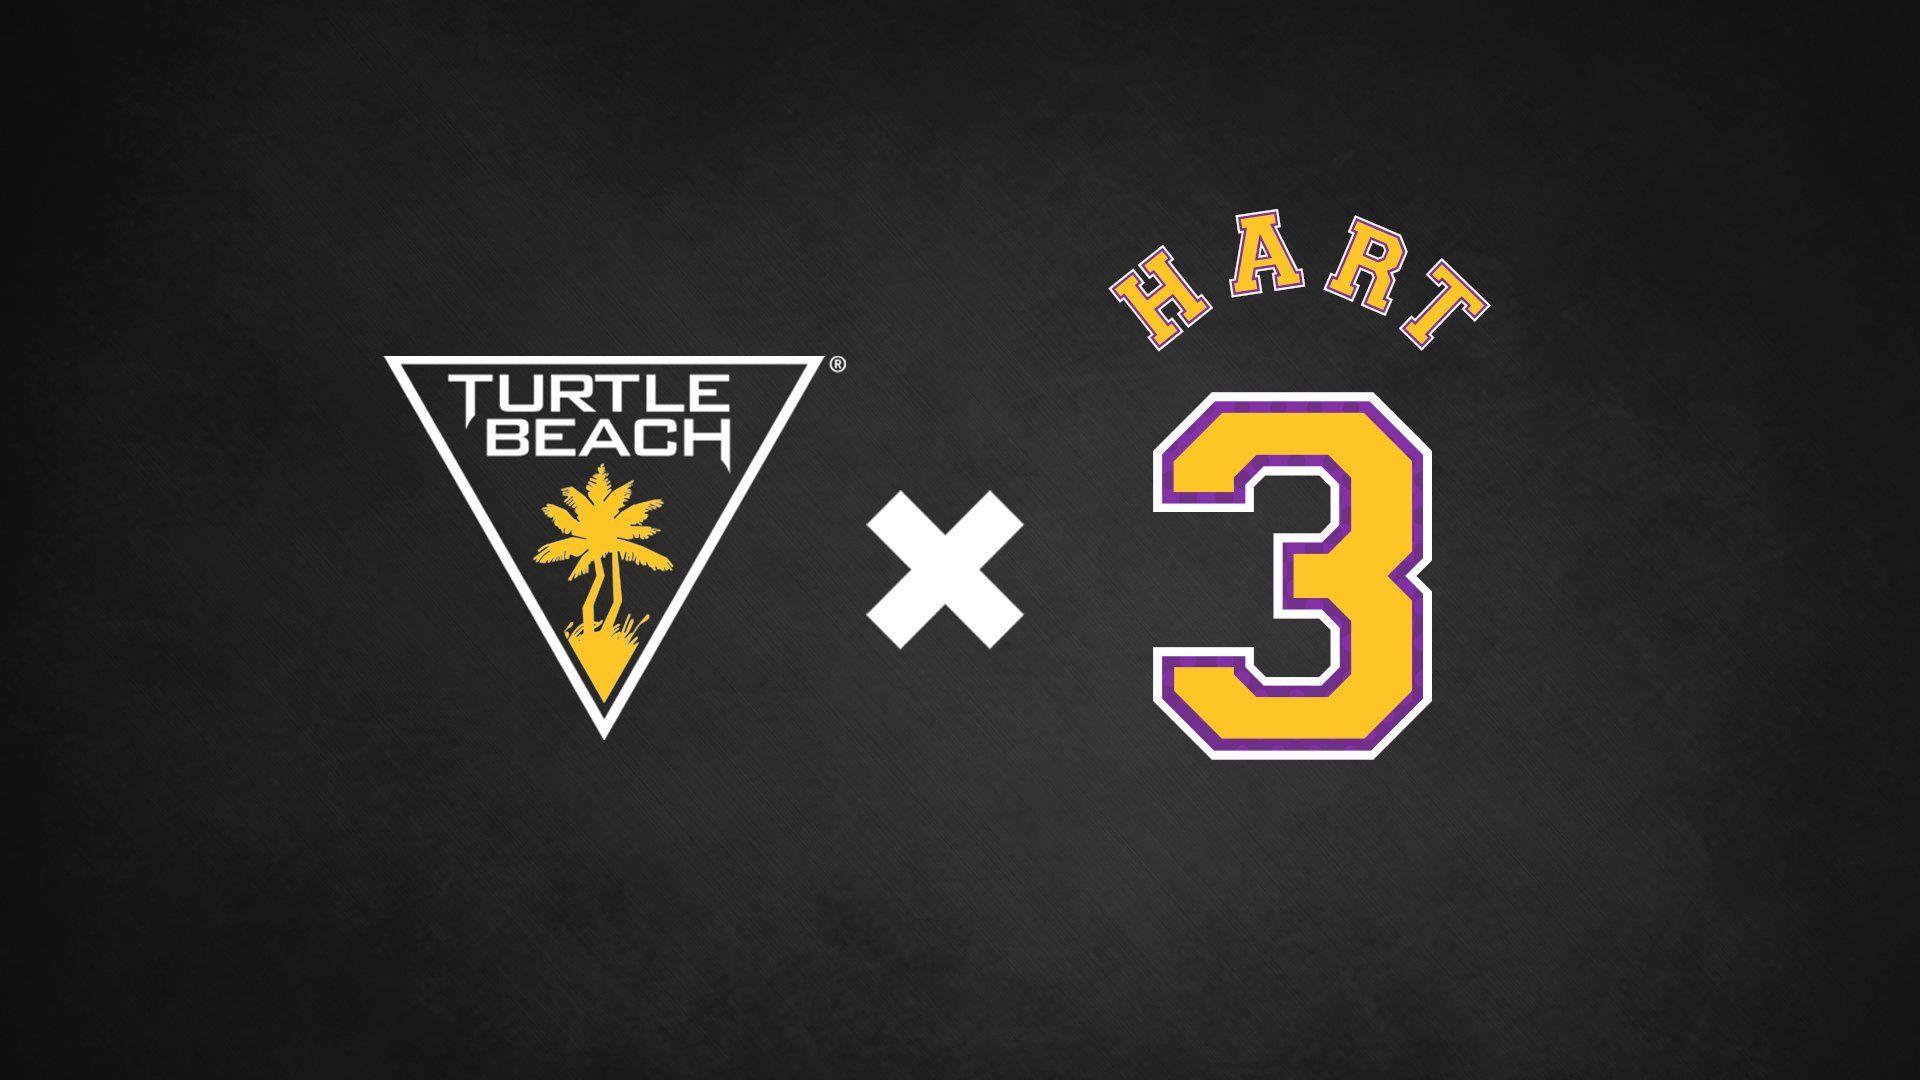 Turtle Sports Logo - Los Angeles Lakers Guard Josh Hart Signs Deal With Turtle Beach ...